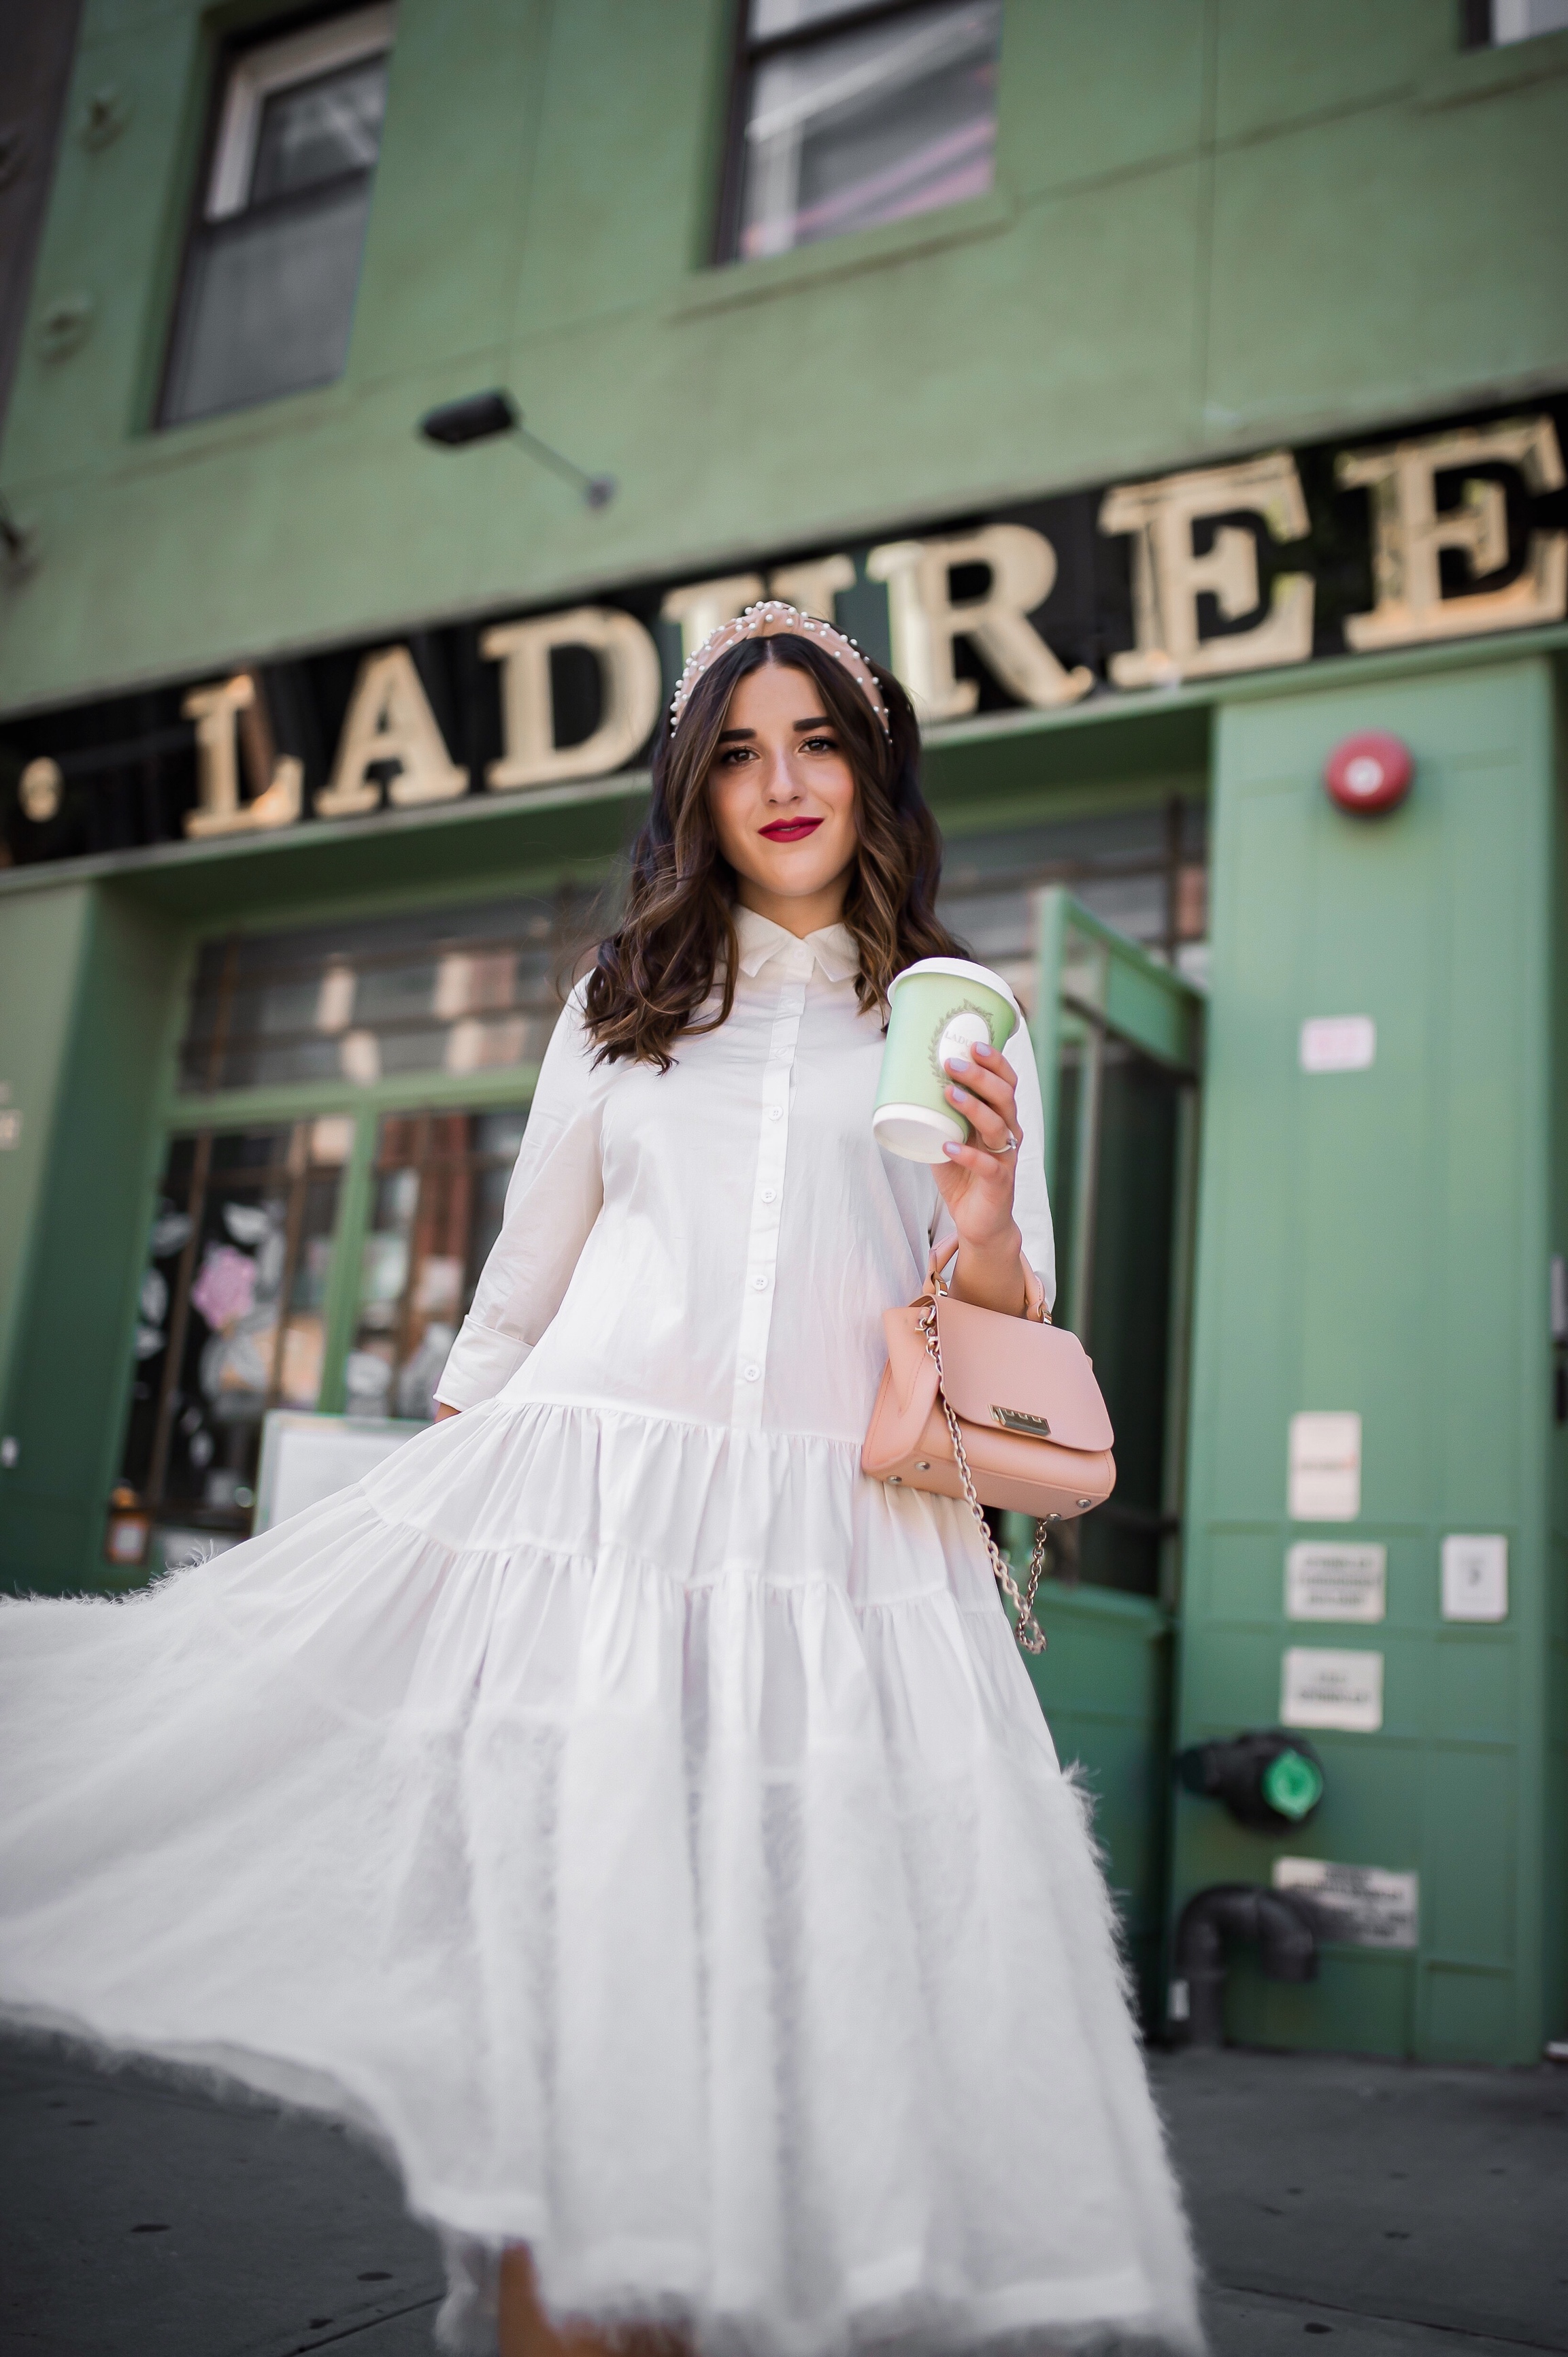 Debunking 8 Common Misconceptions About Fashion Bloggers White Midi Dress Pink Accessories Esther Santer Fashion Blog NYC Street Style Blogger Outfit OOTD Trendy Shopping Girl Headband How To Wear Pink Zac Posen Bag La Duree Photoshoot Jeweled Sandals.JPG